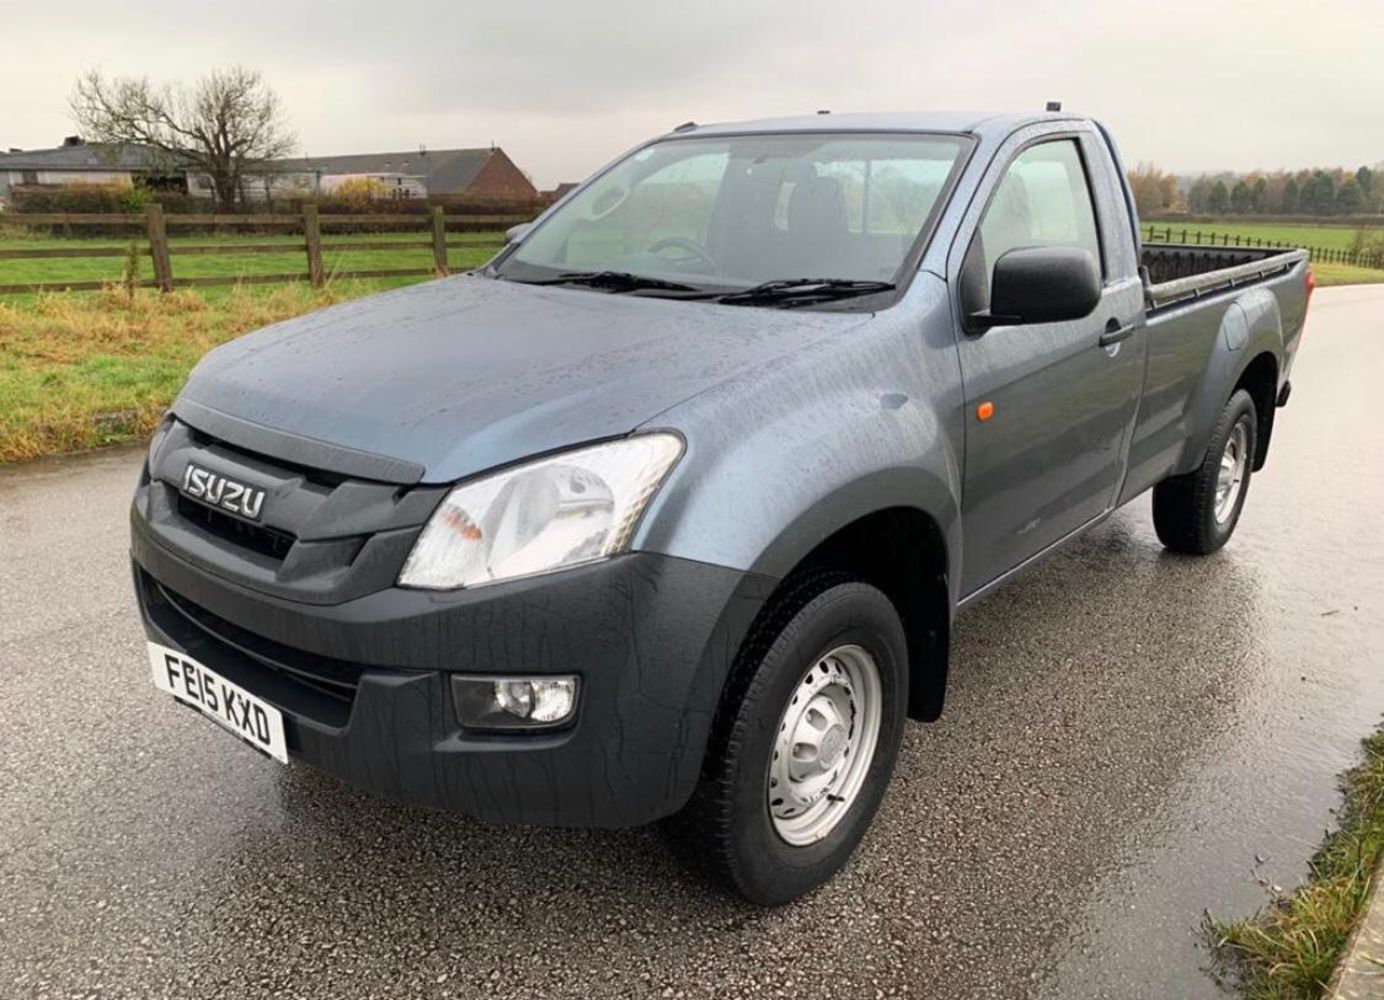 2015 ISUZU D-MAX S/C TWIN TURBO 4X4 TD 2.5 DIESEL PICK-UP, NEW MICRO DIGGERS, MOWERS, TRACTORS, WHEEL LOADERS, FORKLIFTS ETC ENDS 2PM TODAY